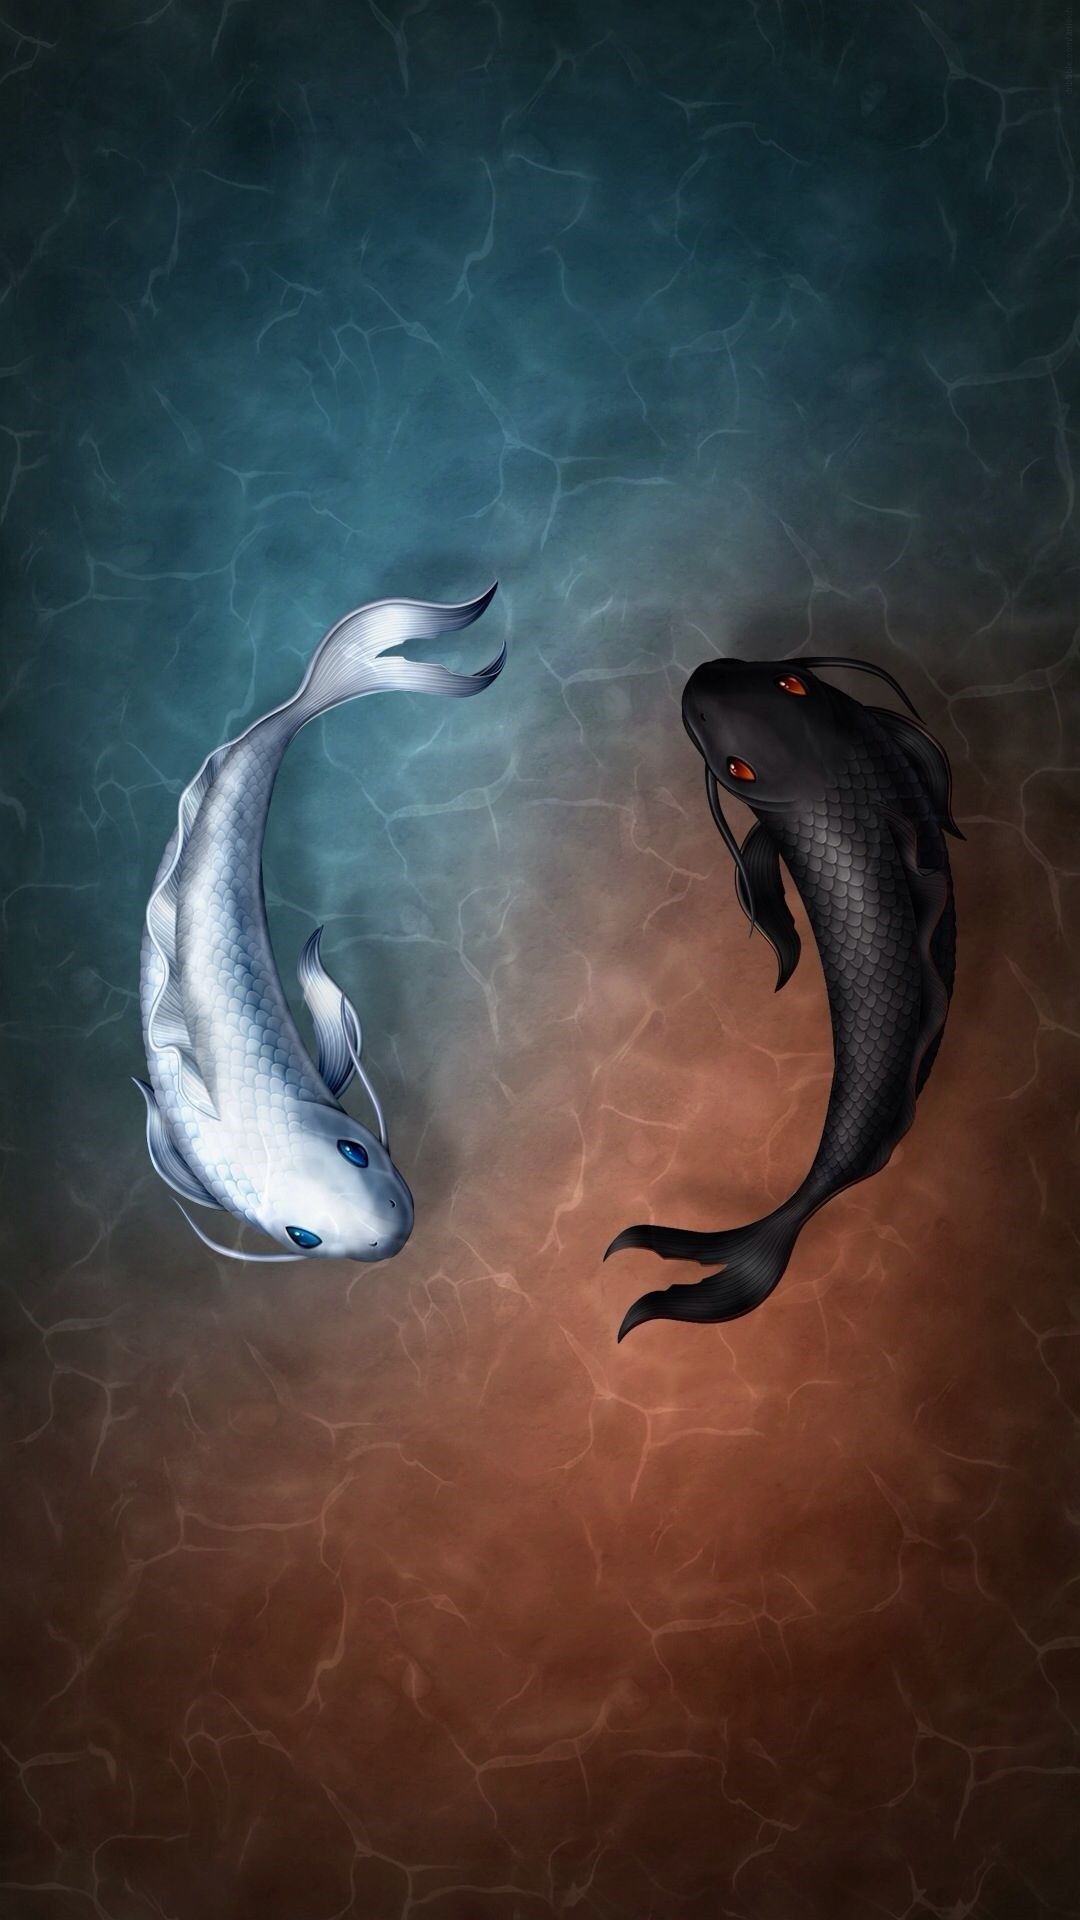 Two fish swimming in the water with different colors - Koi fish, fish